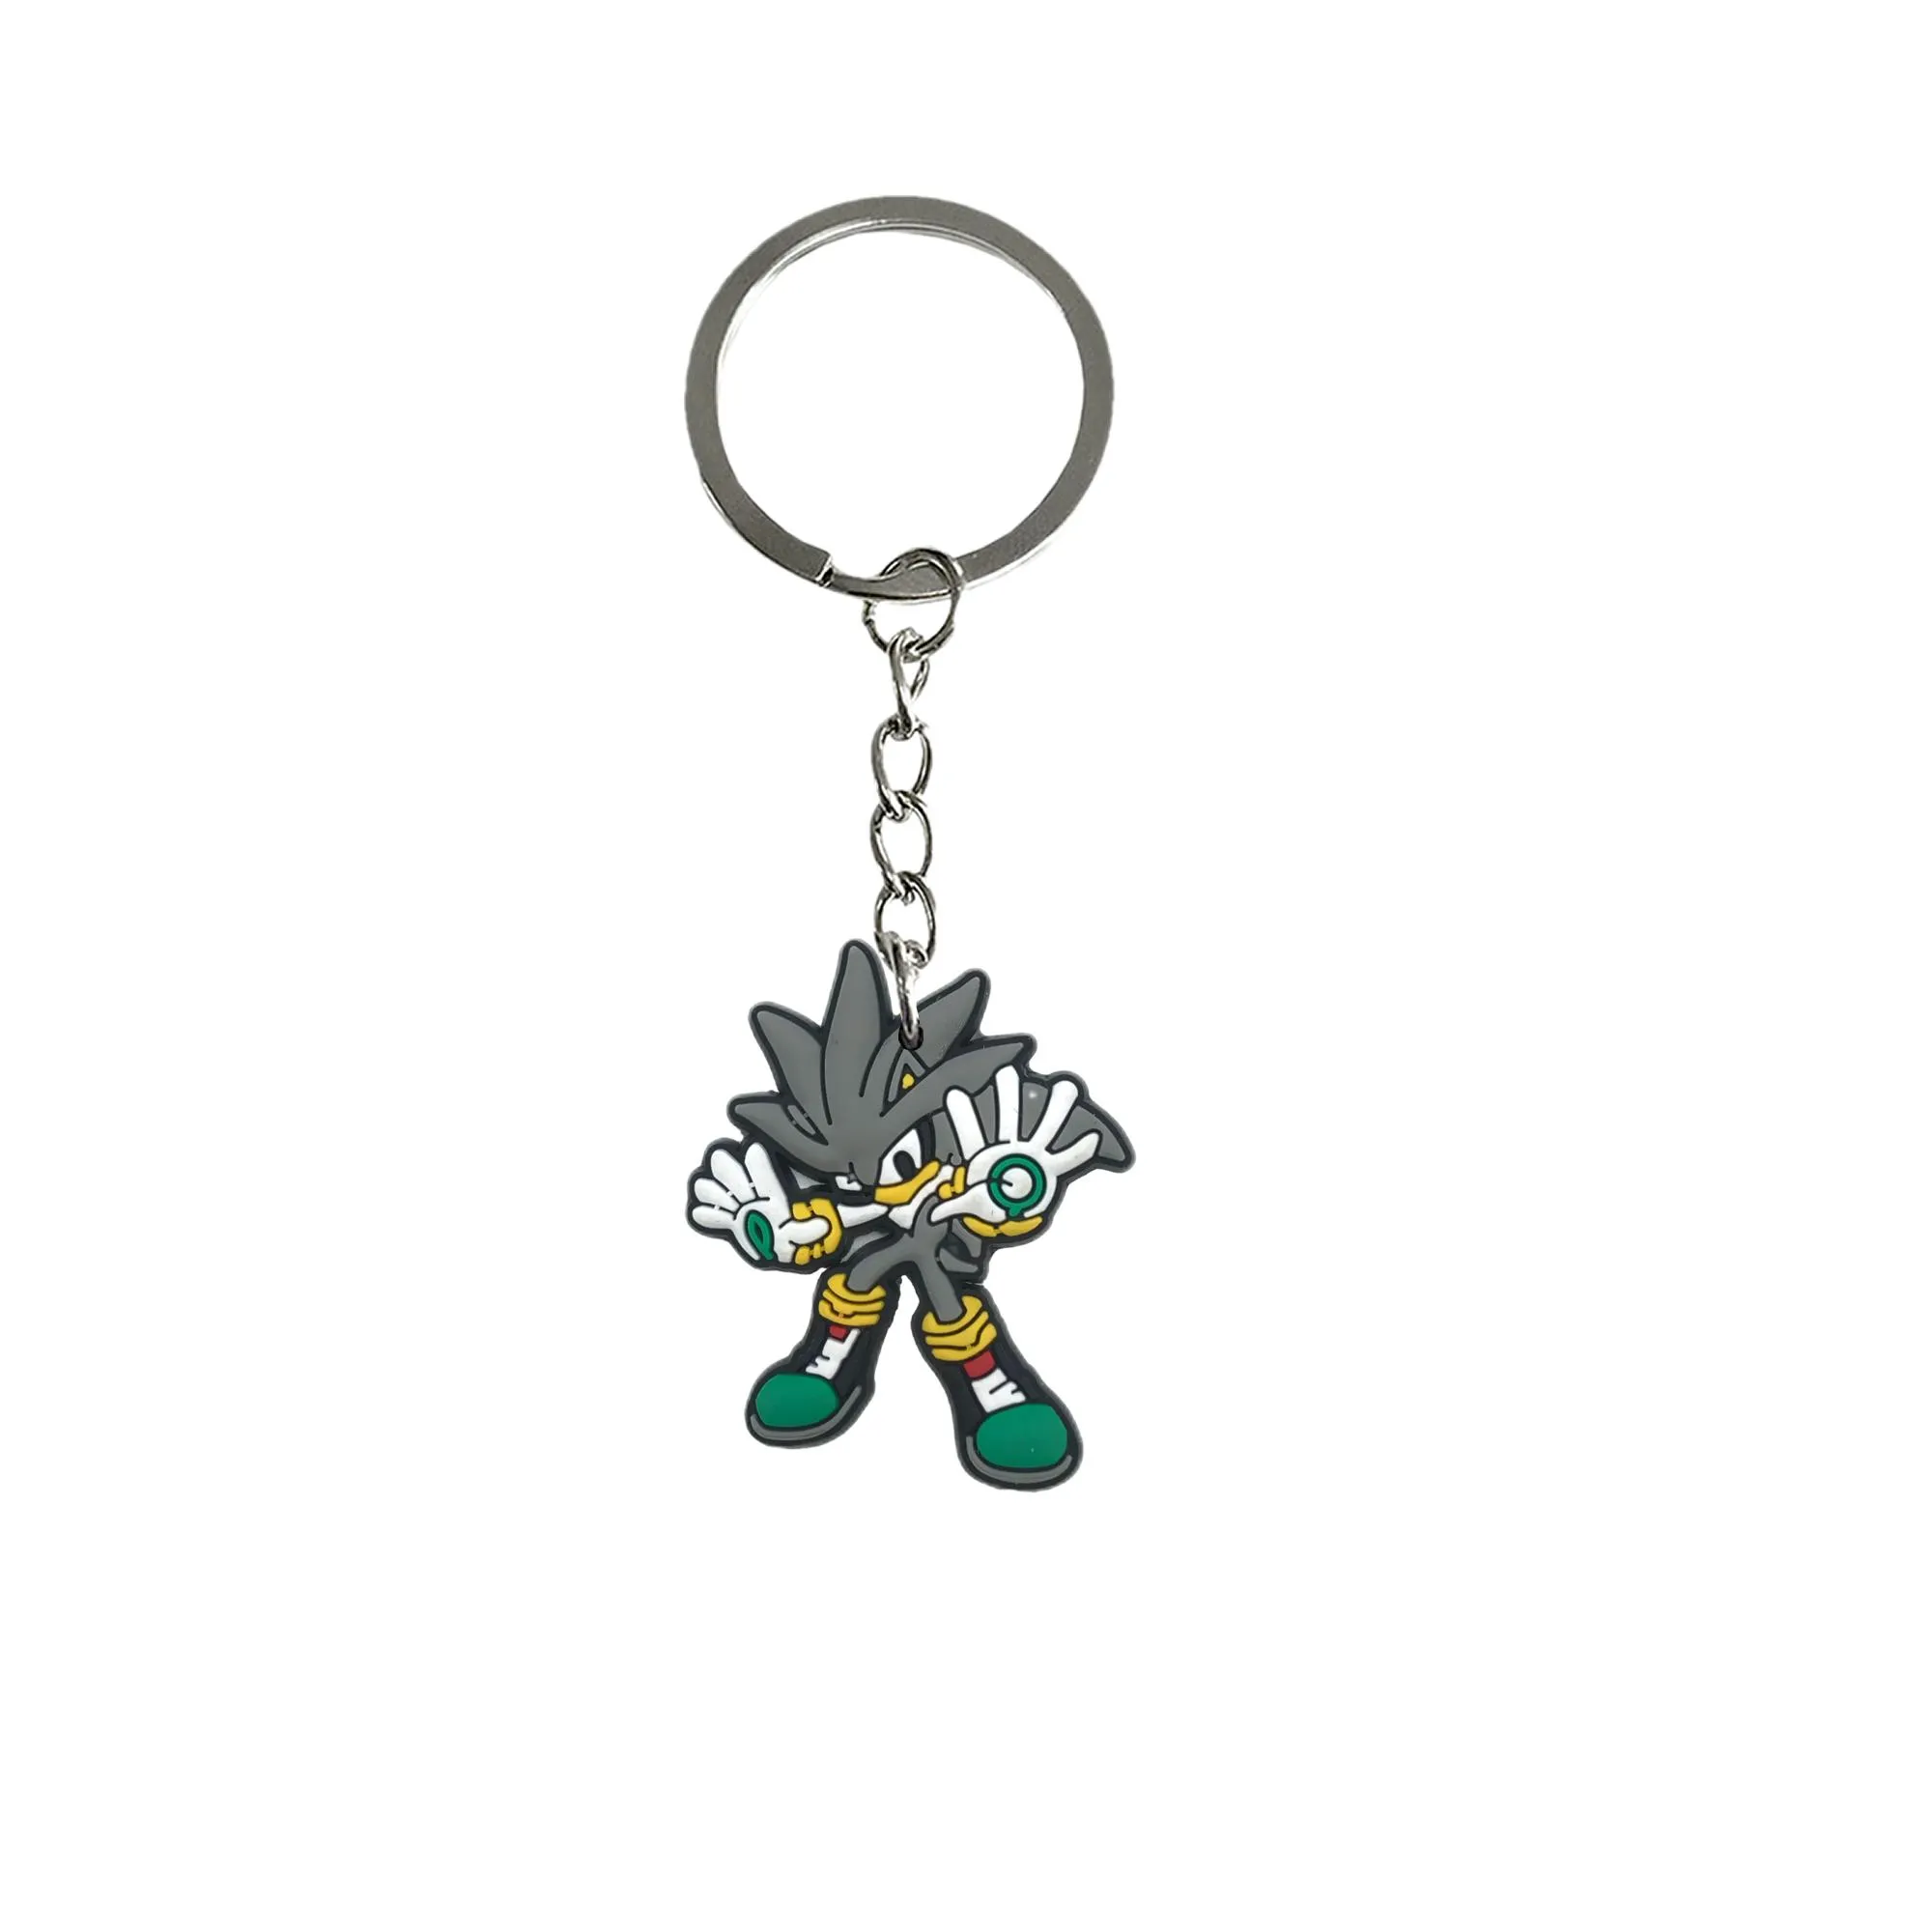 sonic 38 keychain cool colorful anime character with wristlet keyring for school bags backpack keyrings suitable schoolbag keychains childrens party favors